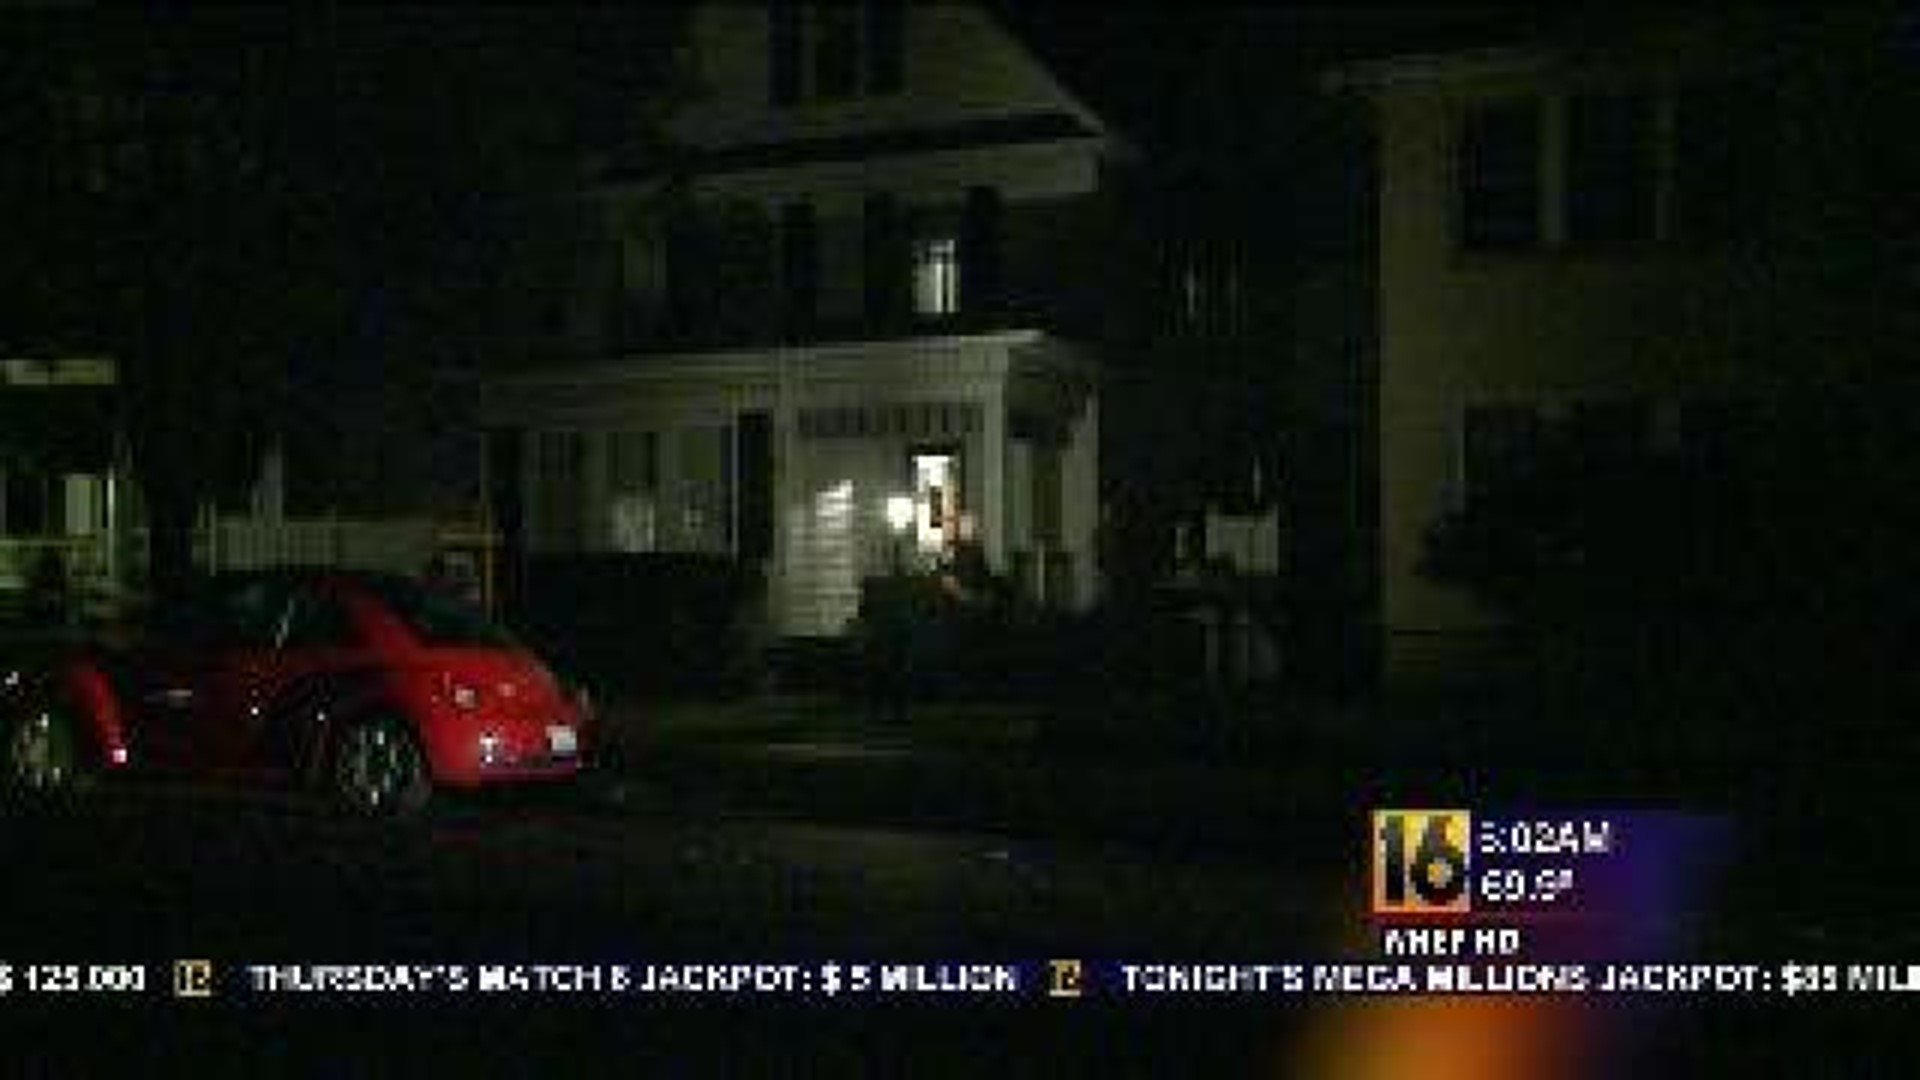 Woman Hospitalized After Stabbing